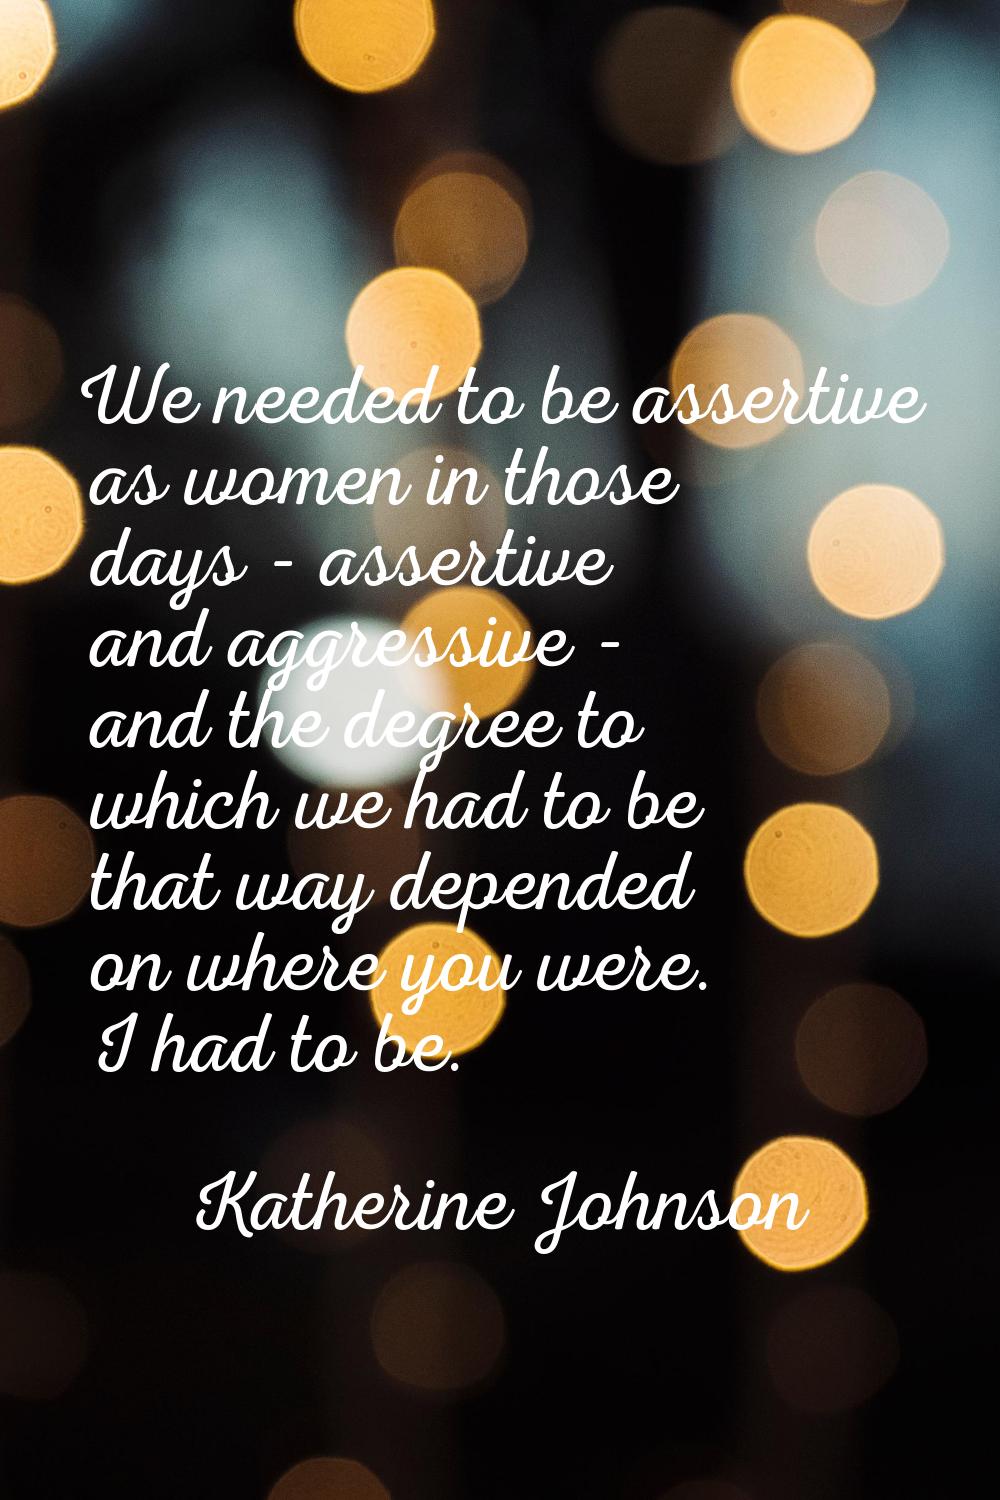 We needed to be assertive as women in those days - assertive and aggressive - and the degree to whi